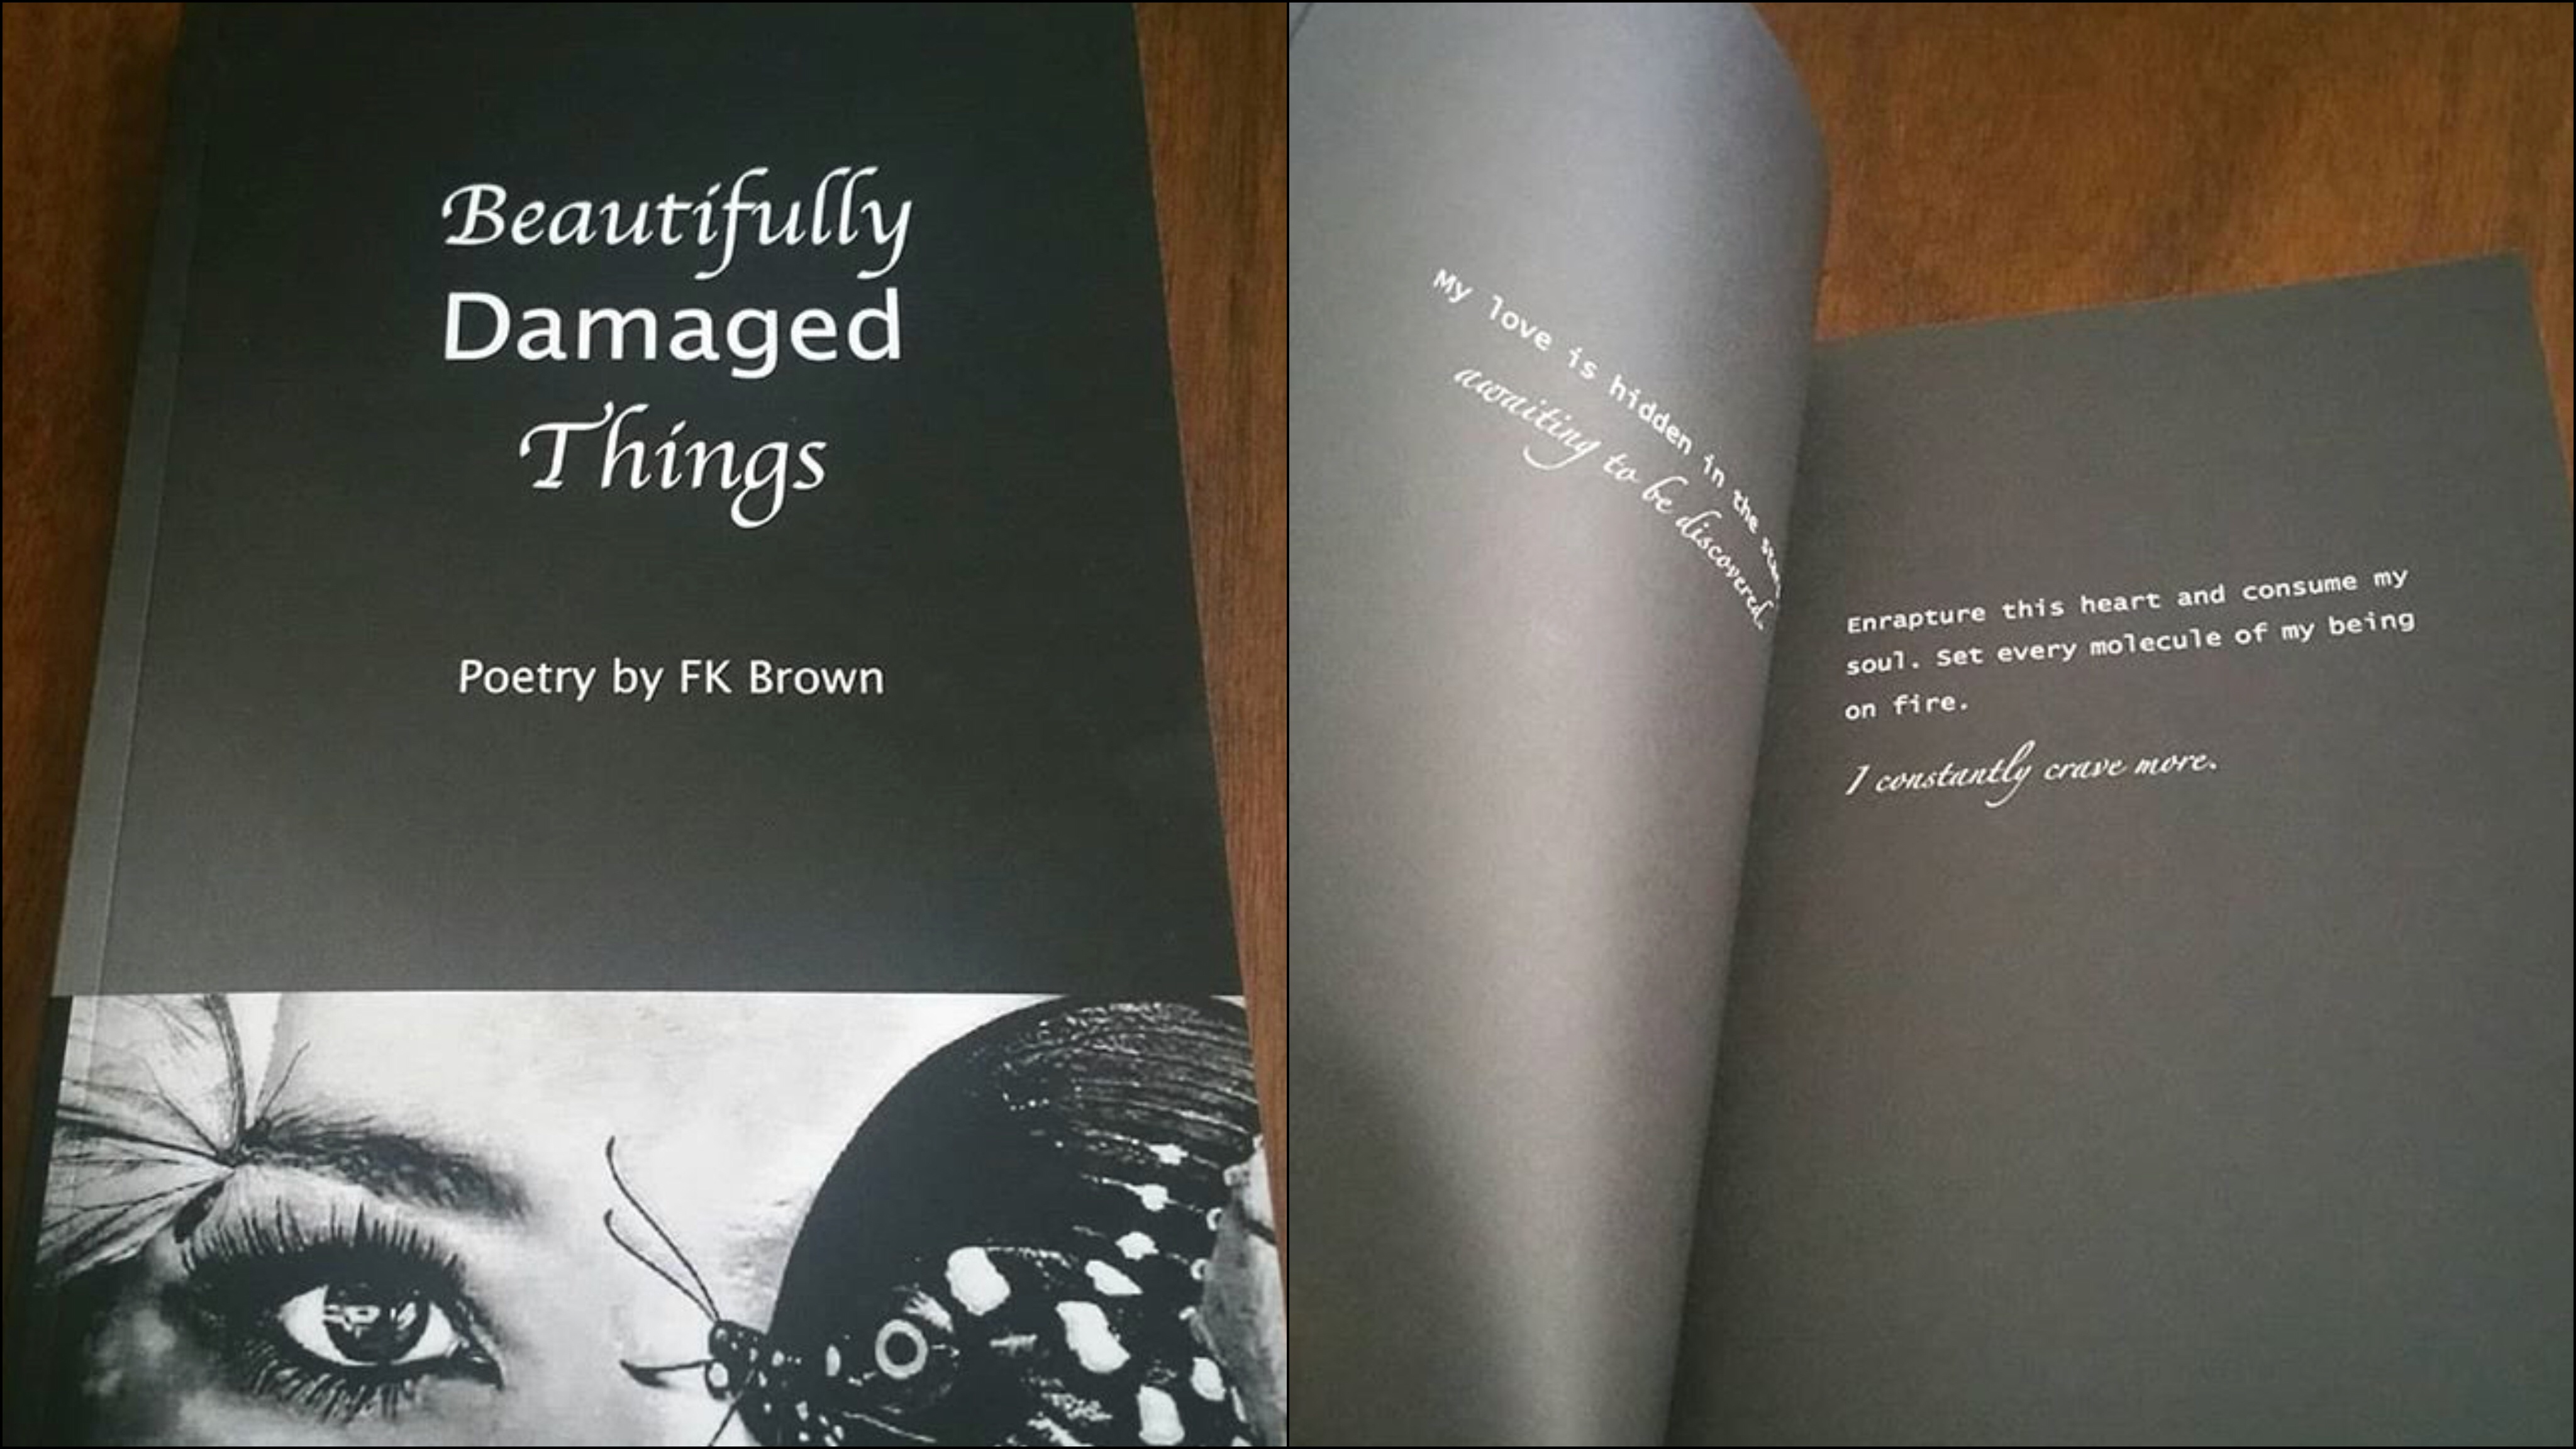 Book Review of “Beautifully Damaged Things” By FK Brown